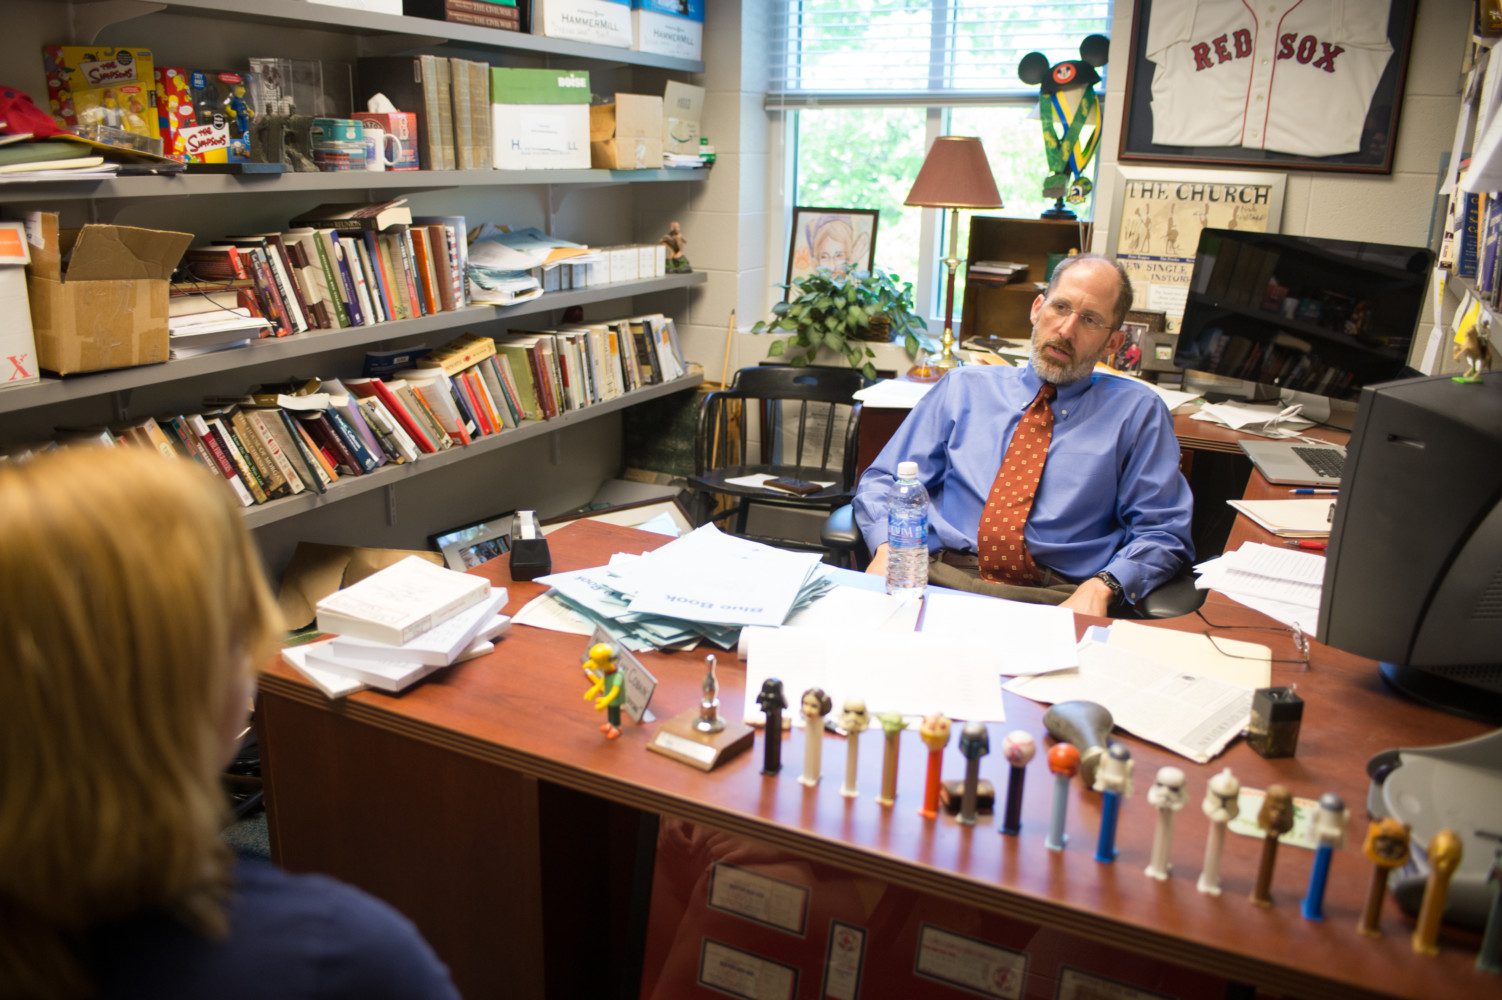 Professor casually sits behind the cluttered desk in his office, chatting with a student.